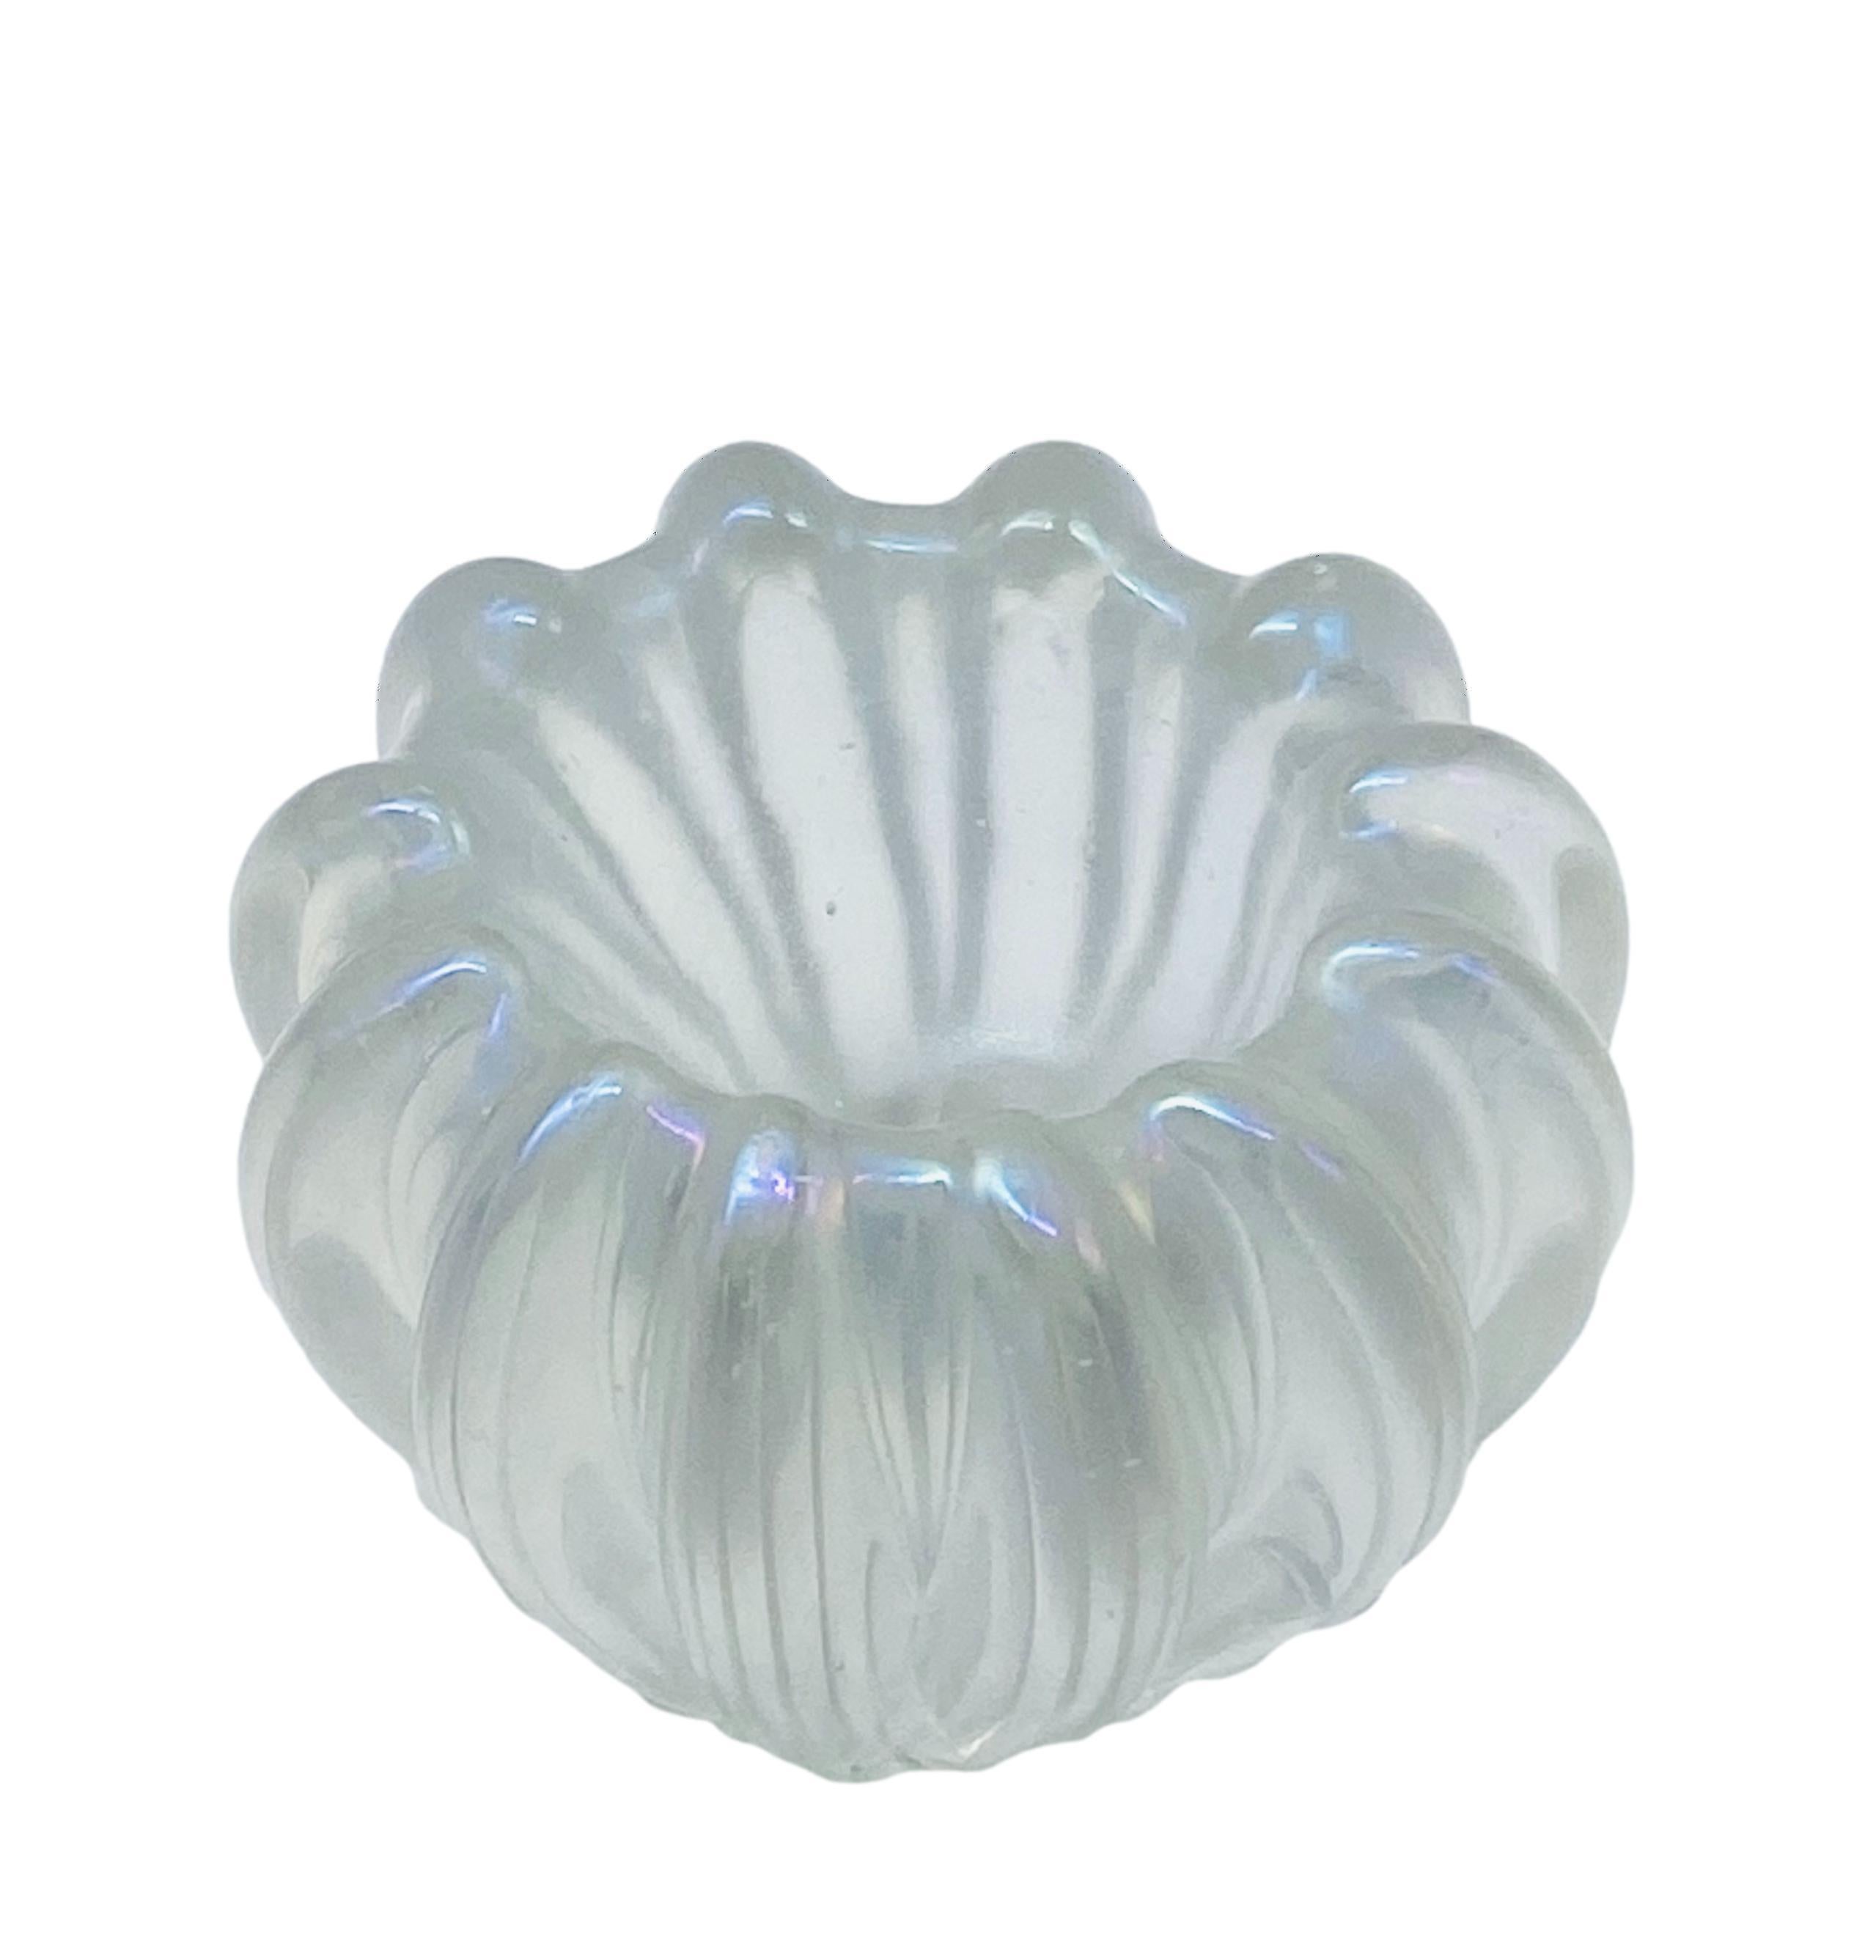 Mid-Century Modern Ercole Barovier for Barovier & Toso Iridescent Glass Bowl, Italy, 1948